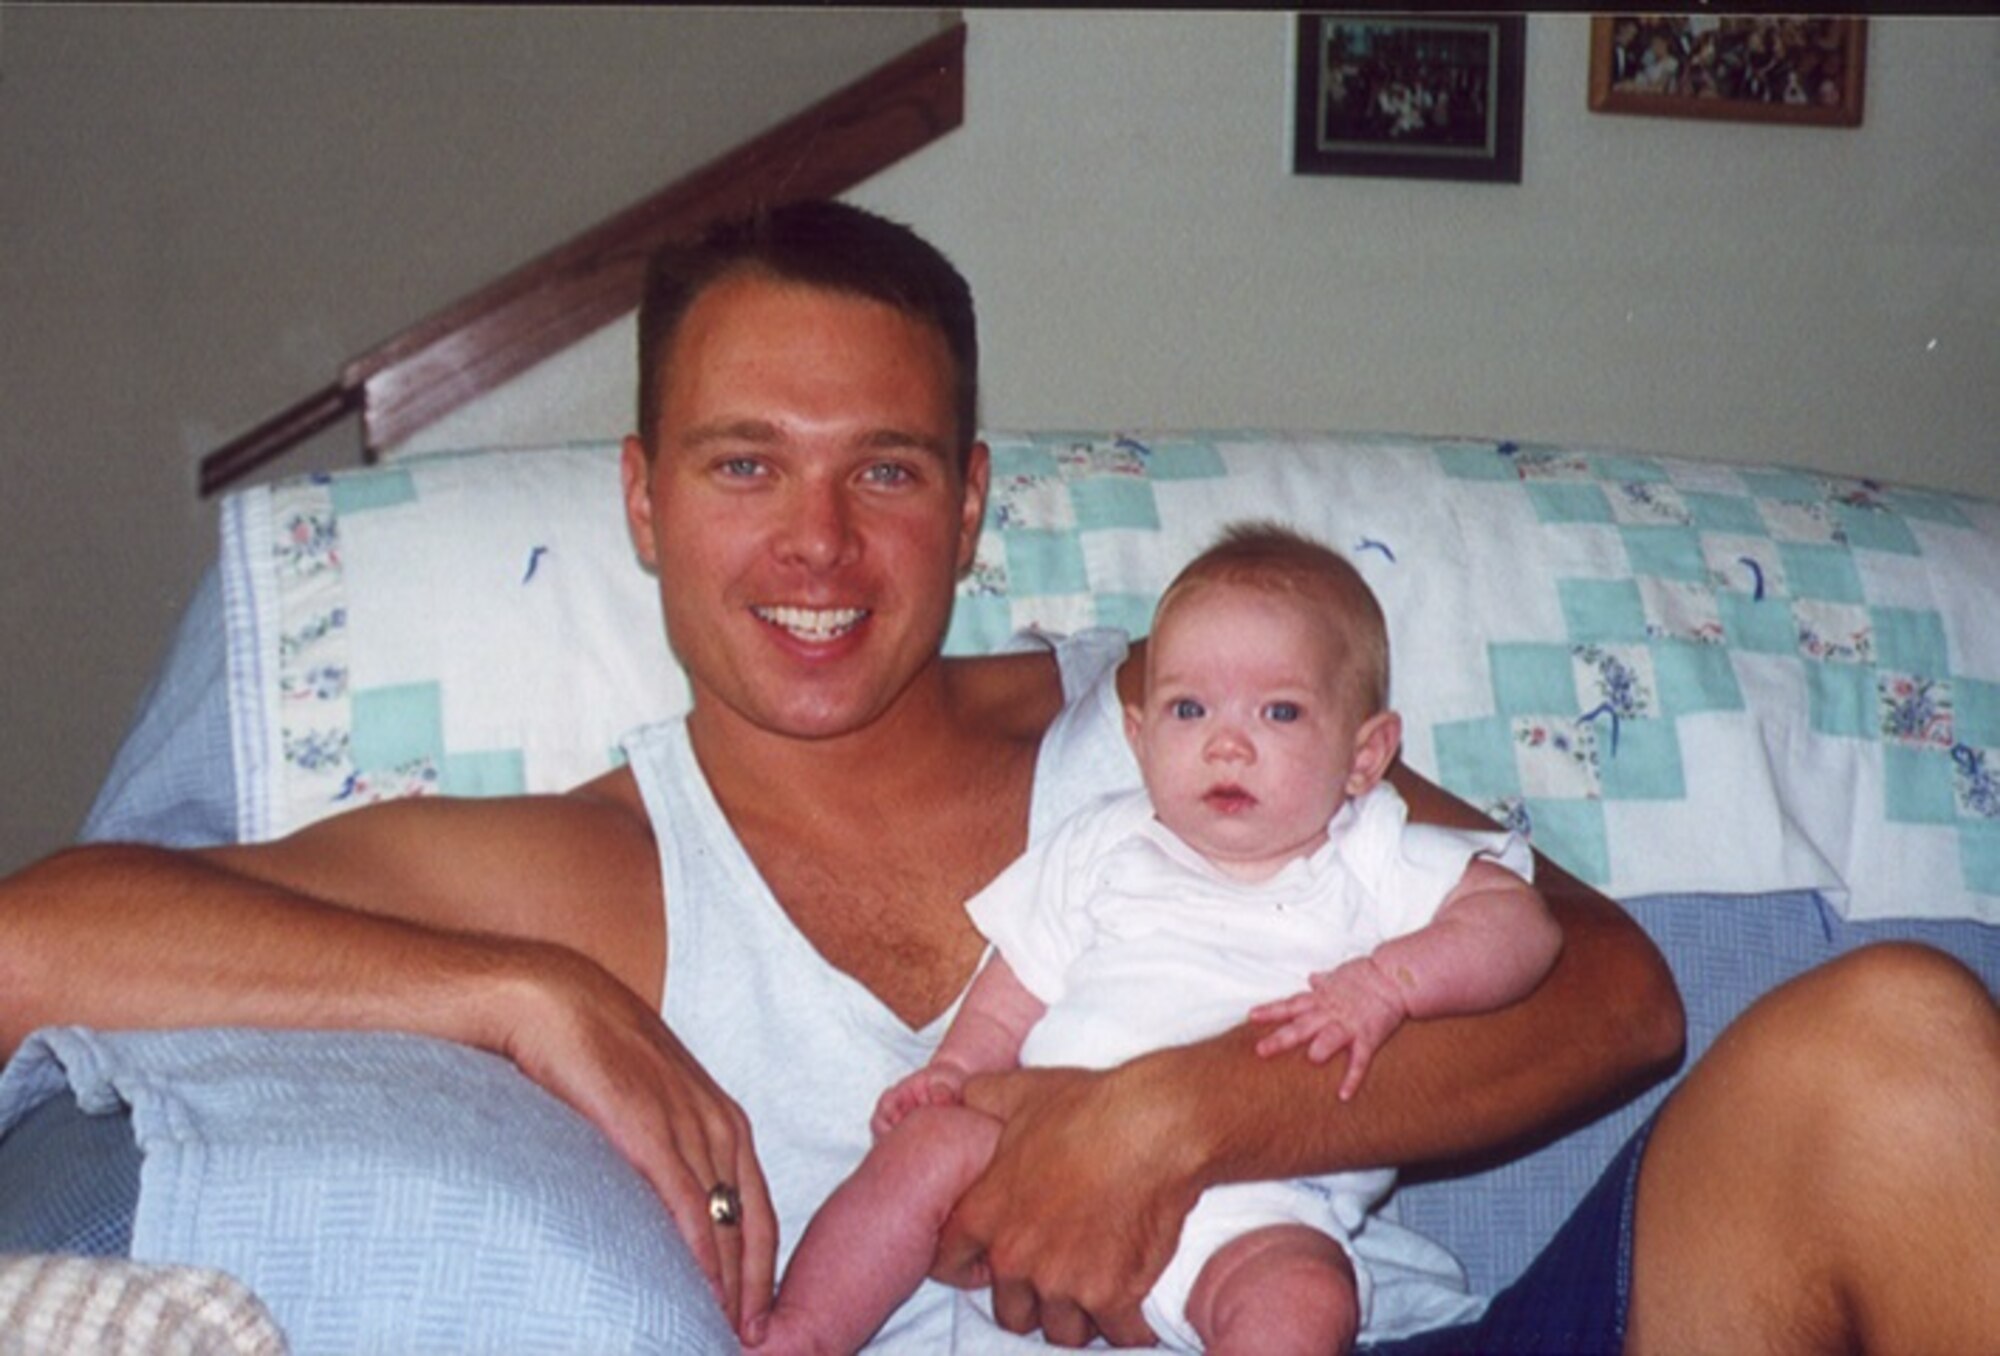 Lt. Col. Luke Lokowich, 5th Reconnaissance Squadron commander, with his daughter Avery at Barksdale Air Force Base, La., during the summer of 2000, a few months after she was born. Fifteen years ago, Lokowich lost his wife, JoAnne, when she suffered a cerebral hemorrhaging due to an aneurism. With the support of his family and friends, and healthy coping methods, Lokowich has been resilient, and has since remarried and still celebrates JoAnne’s life. (Courtesy photo)